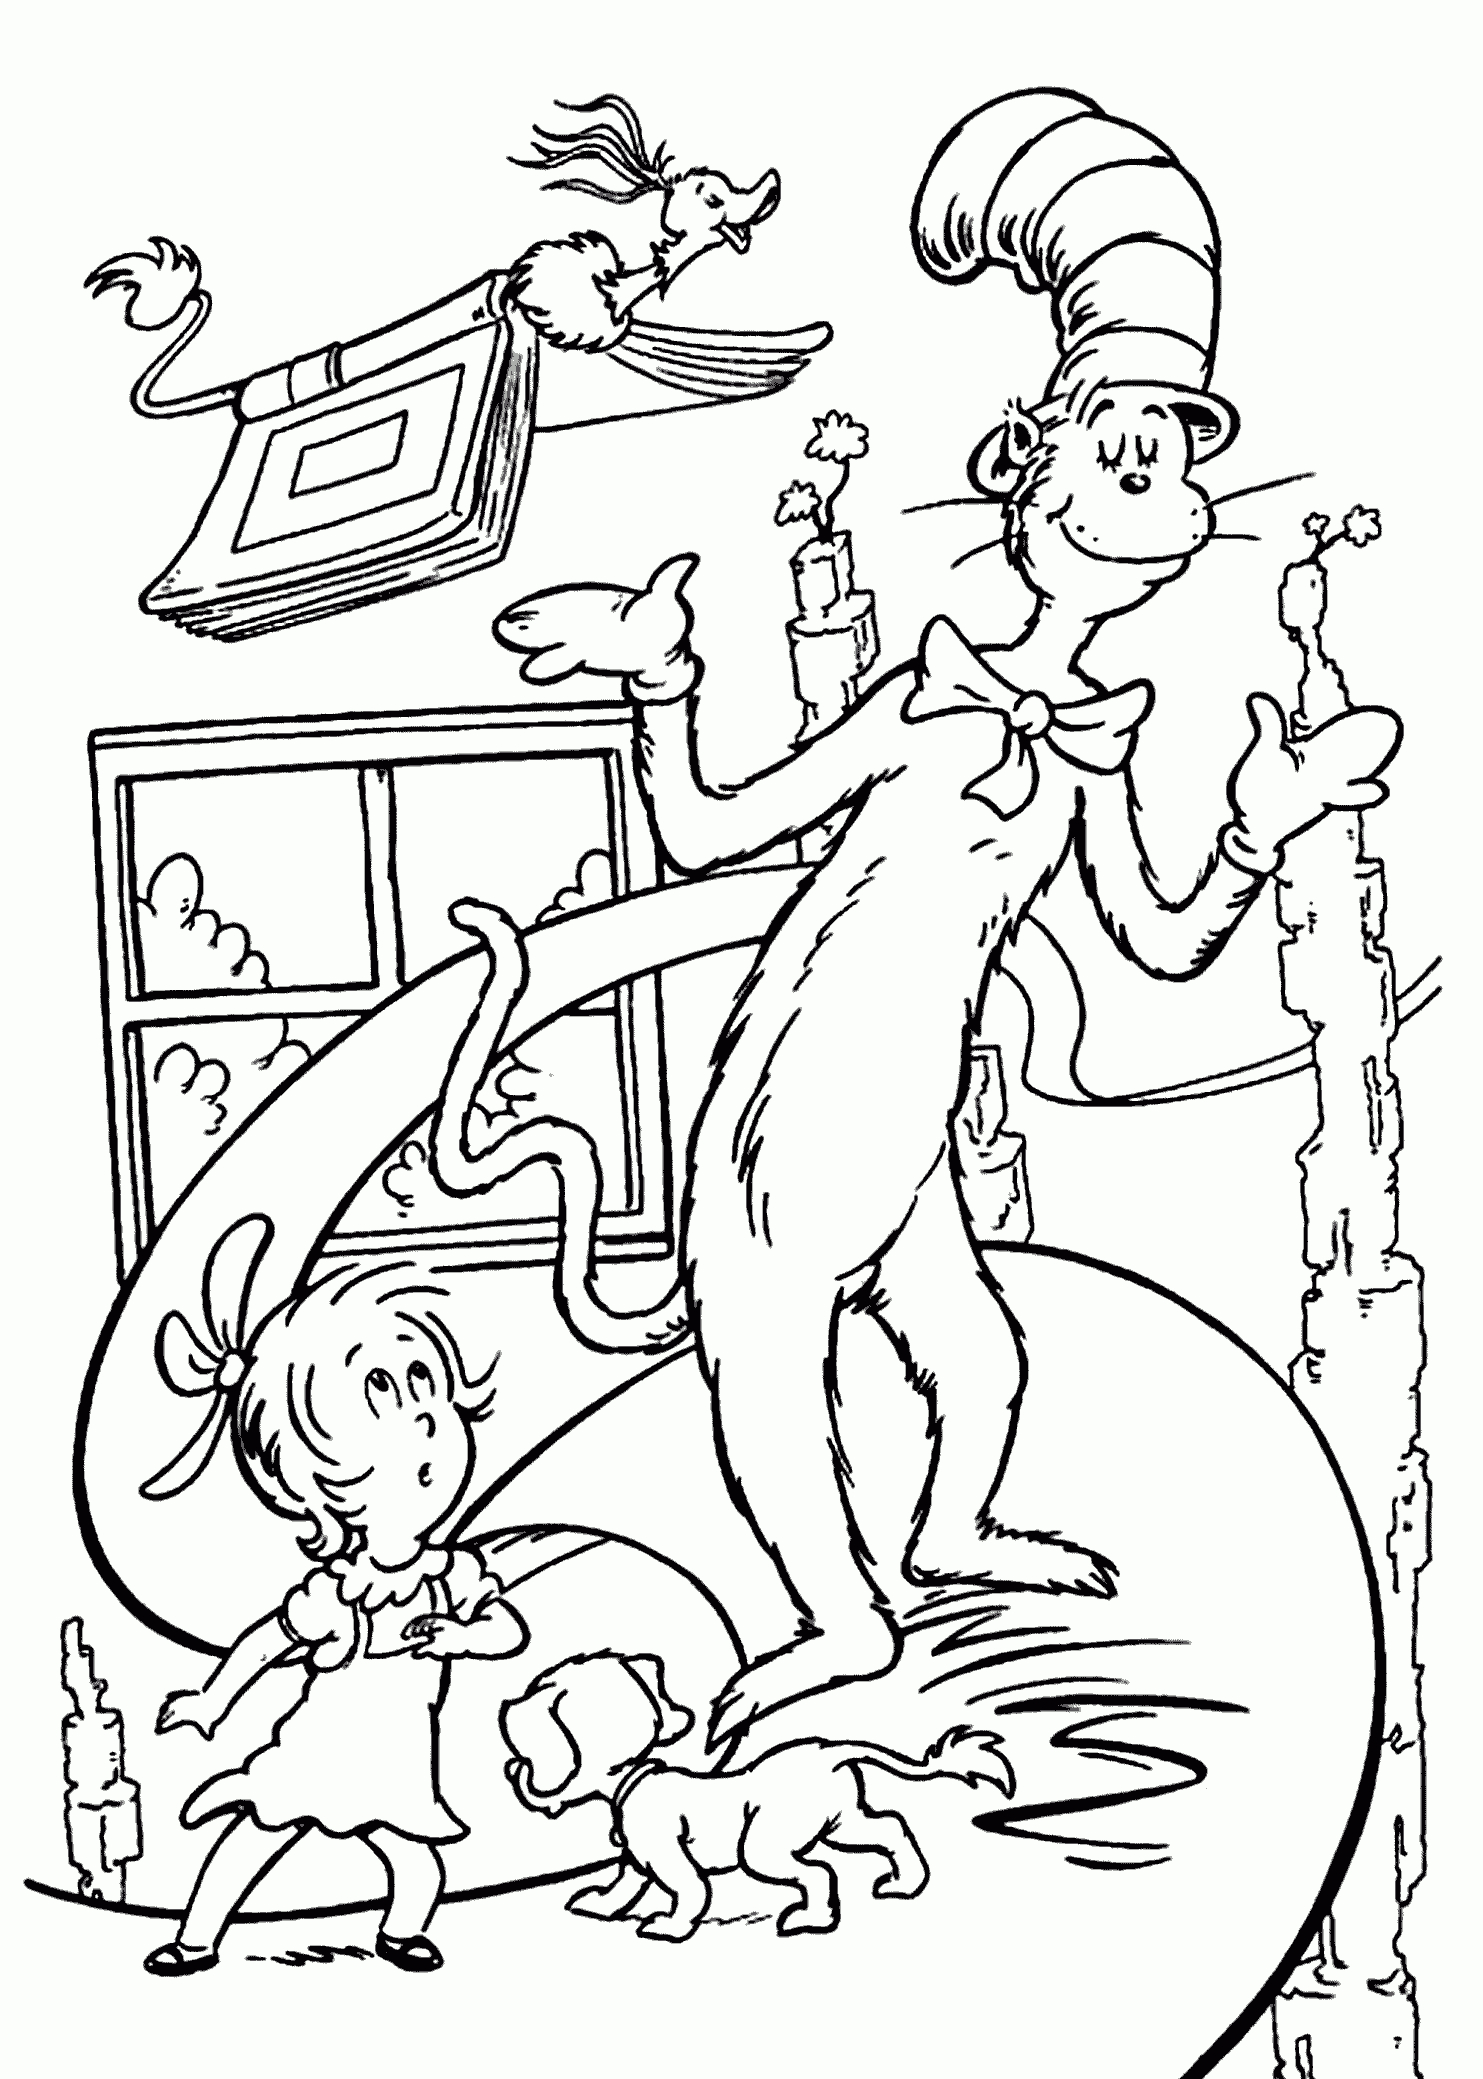 Funny Сat In The Hat Coloring Pages For Kids, Printable Free - Dr - Free Printable Dr Seuss Coloring Pages